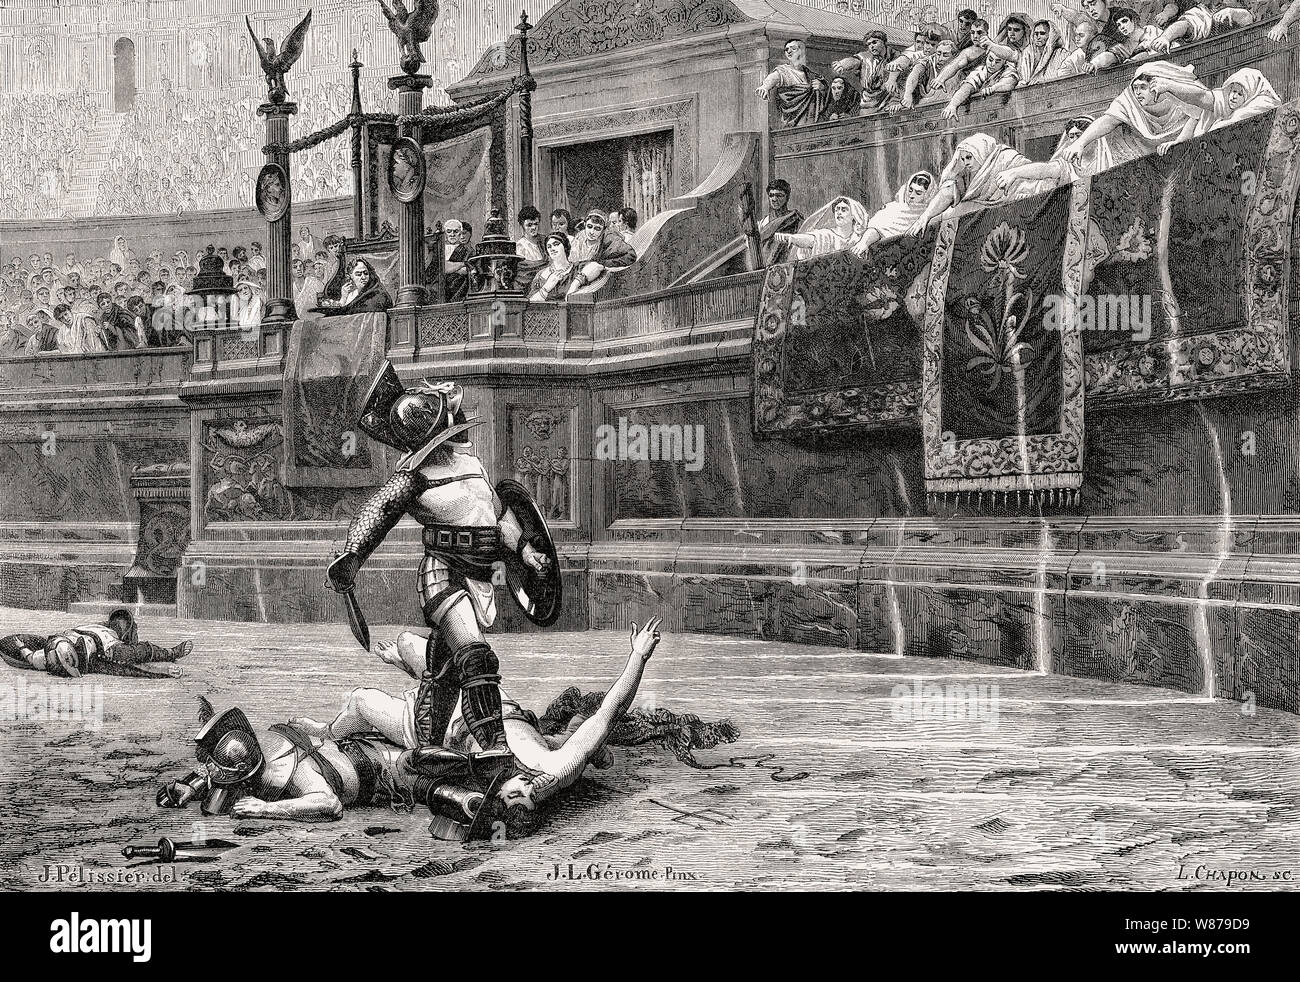 Gladiatorial Fights at the Colosseum, ancient Amphitheatre, Rome, Italy Stock Photo